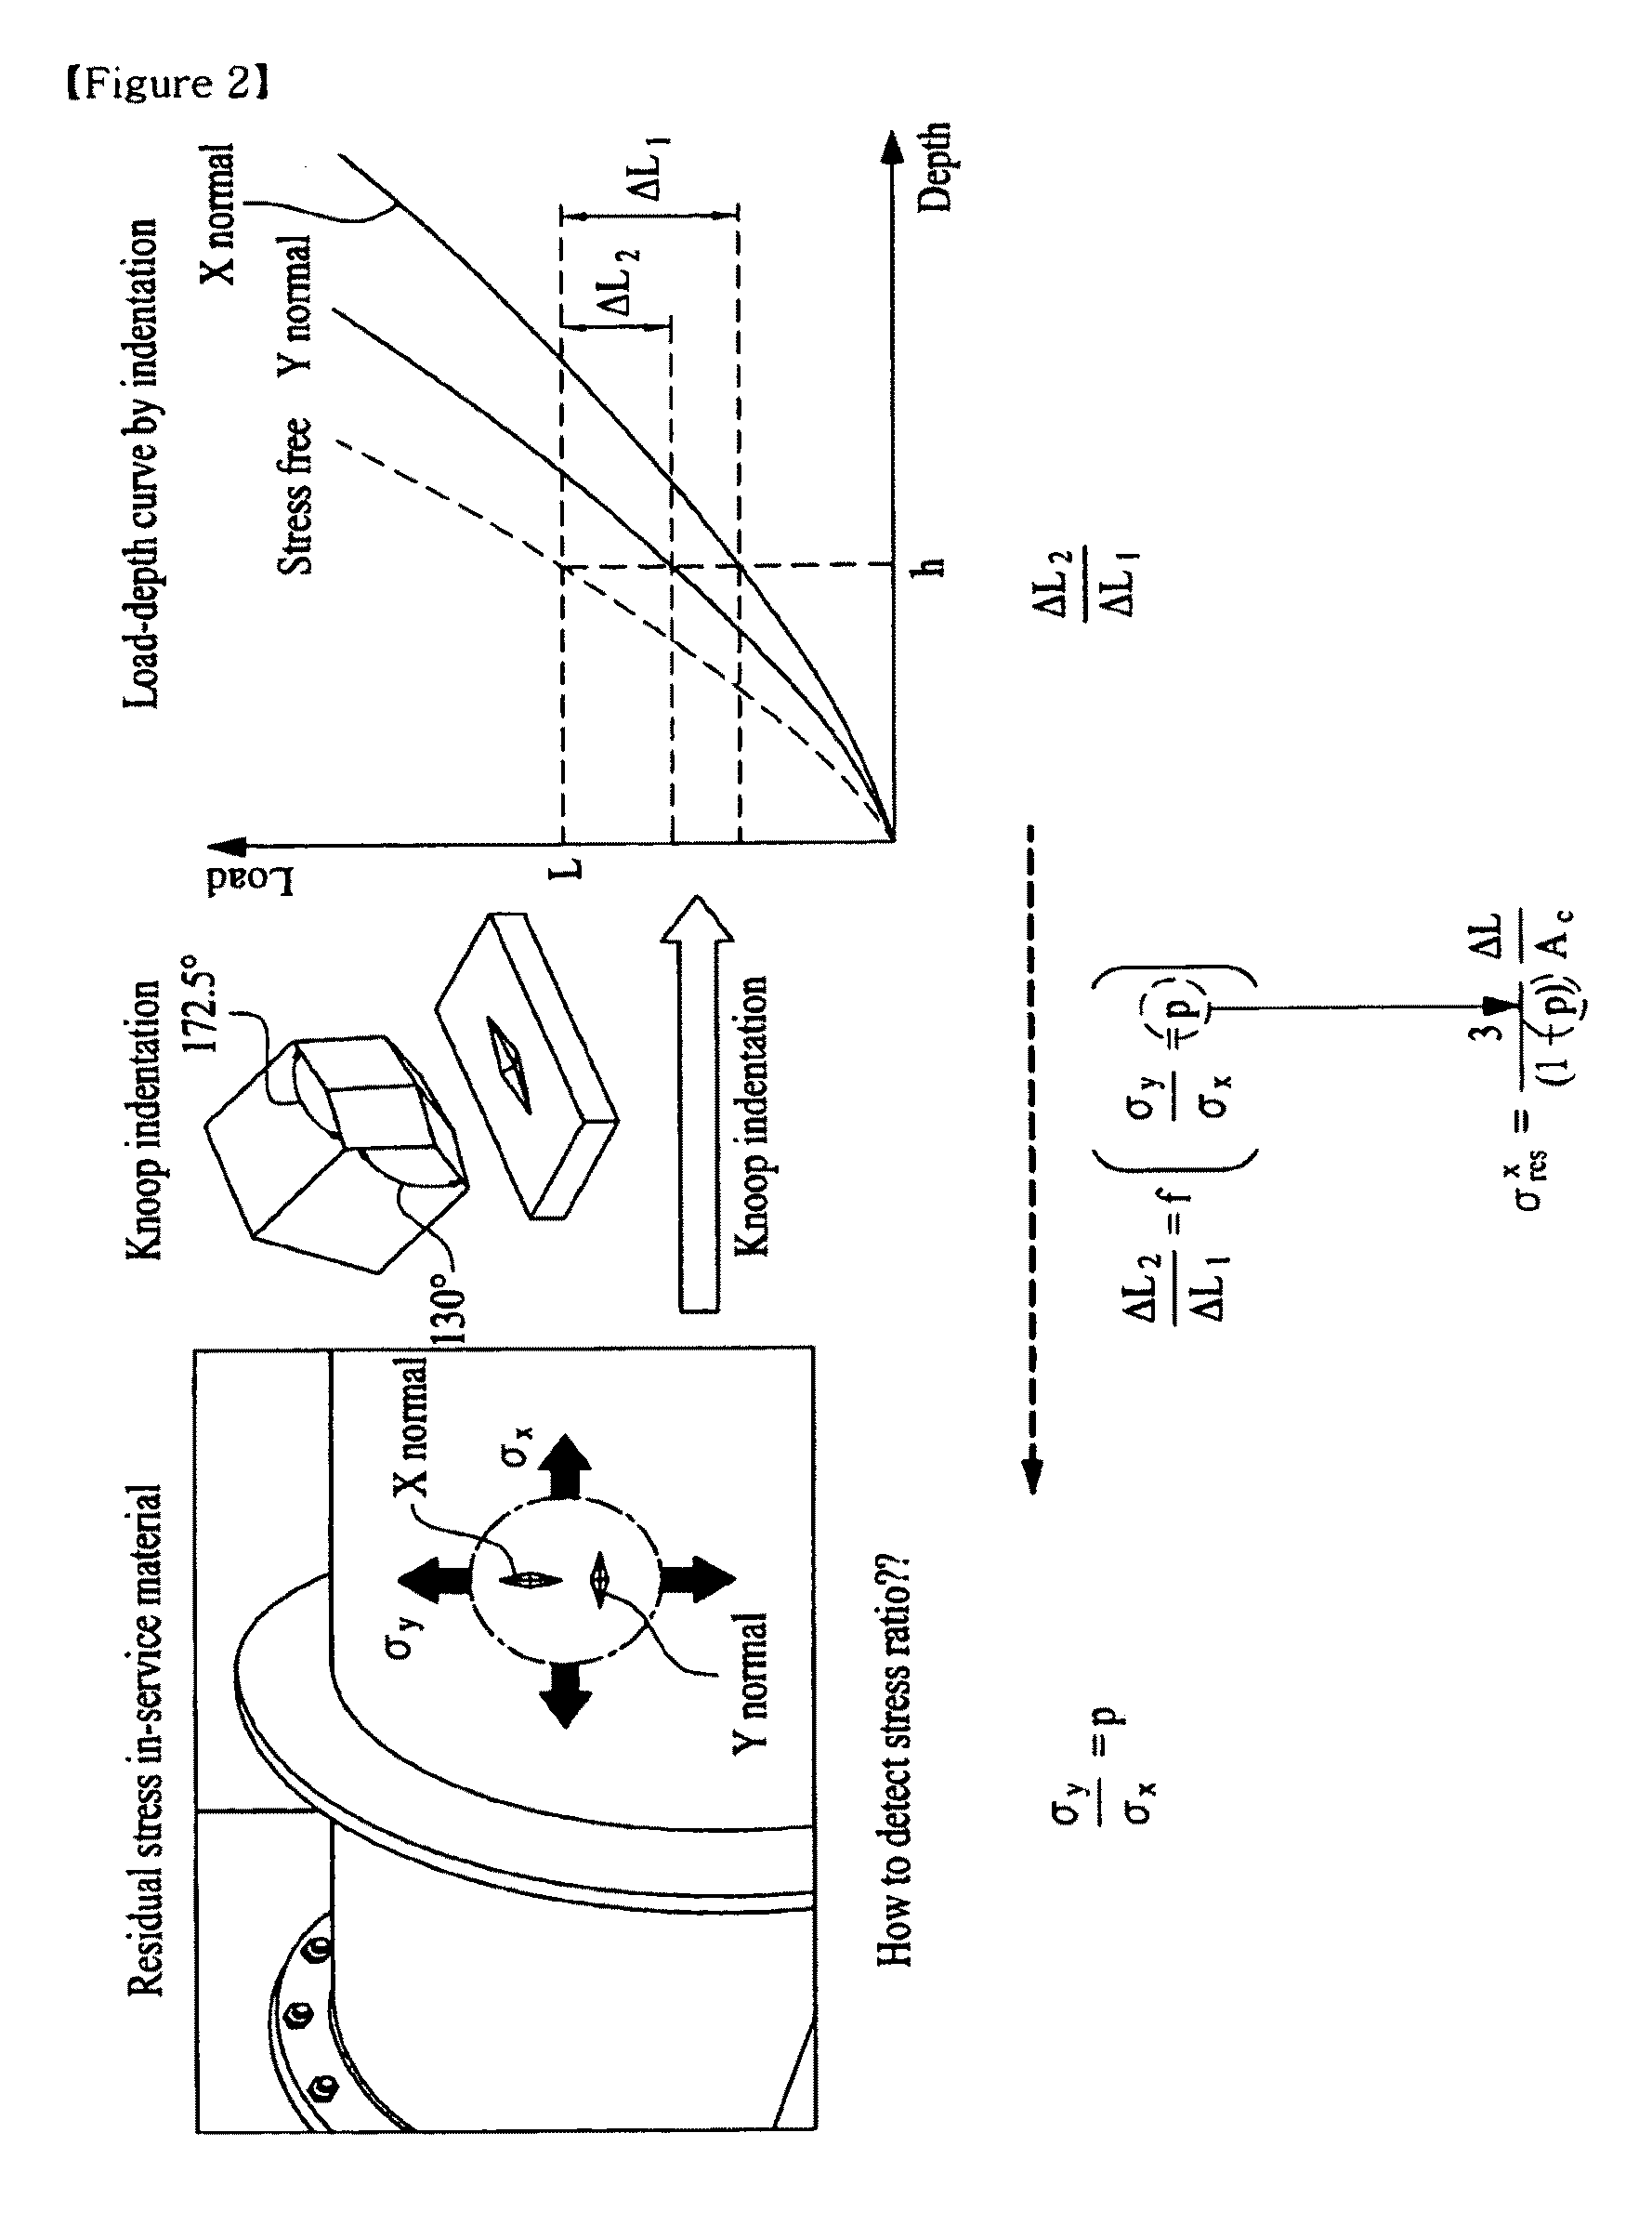 Estimation of non-equibiaxial stress using instrumented indentation technique